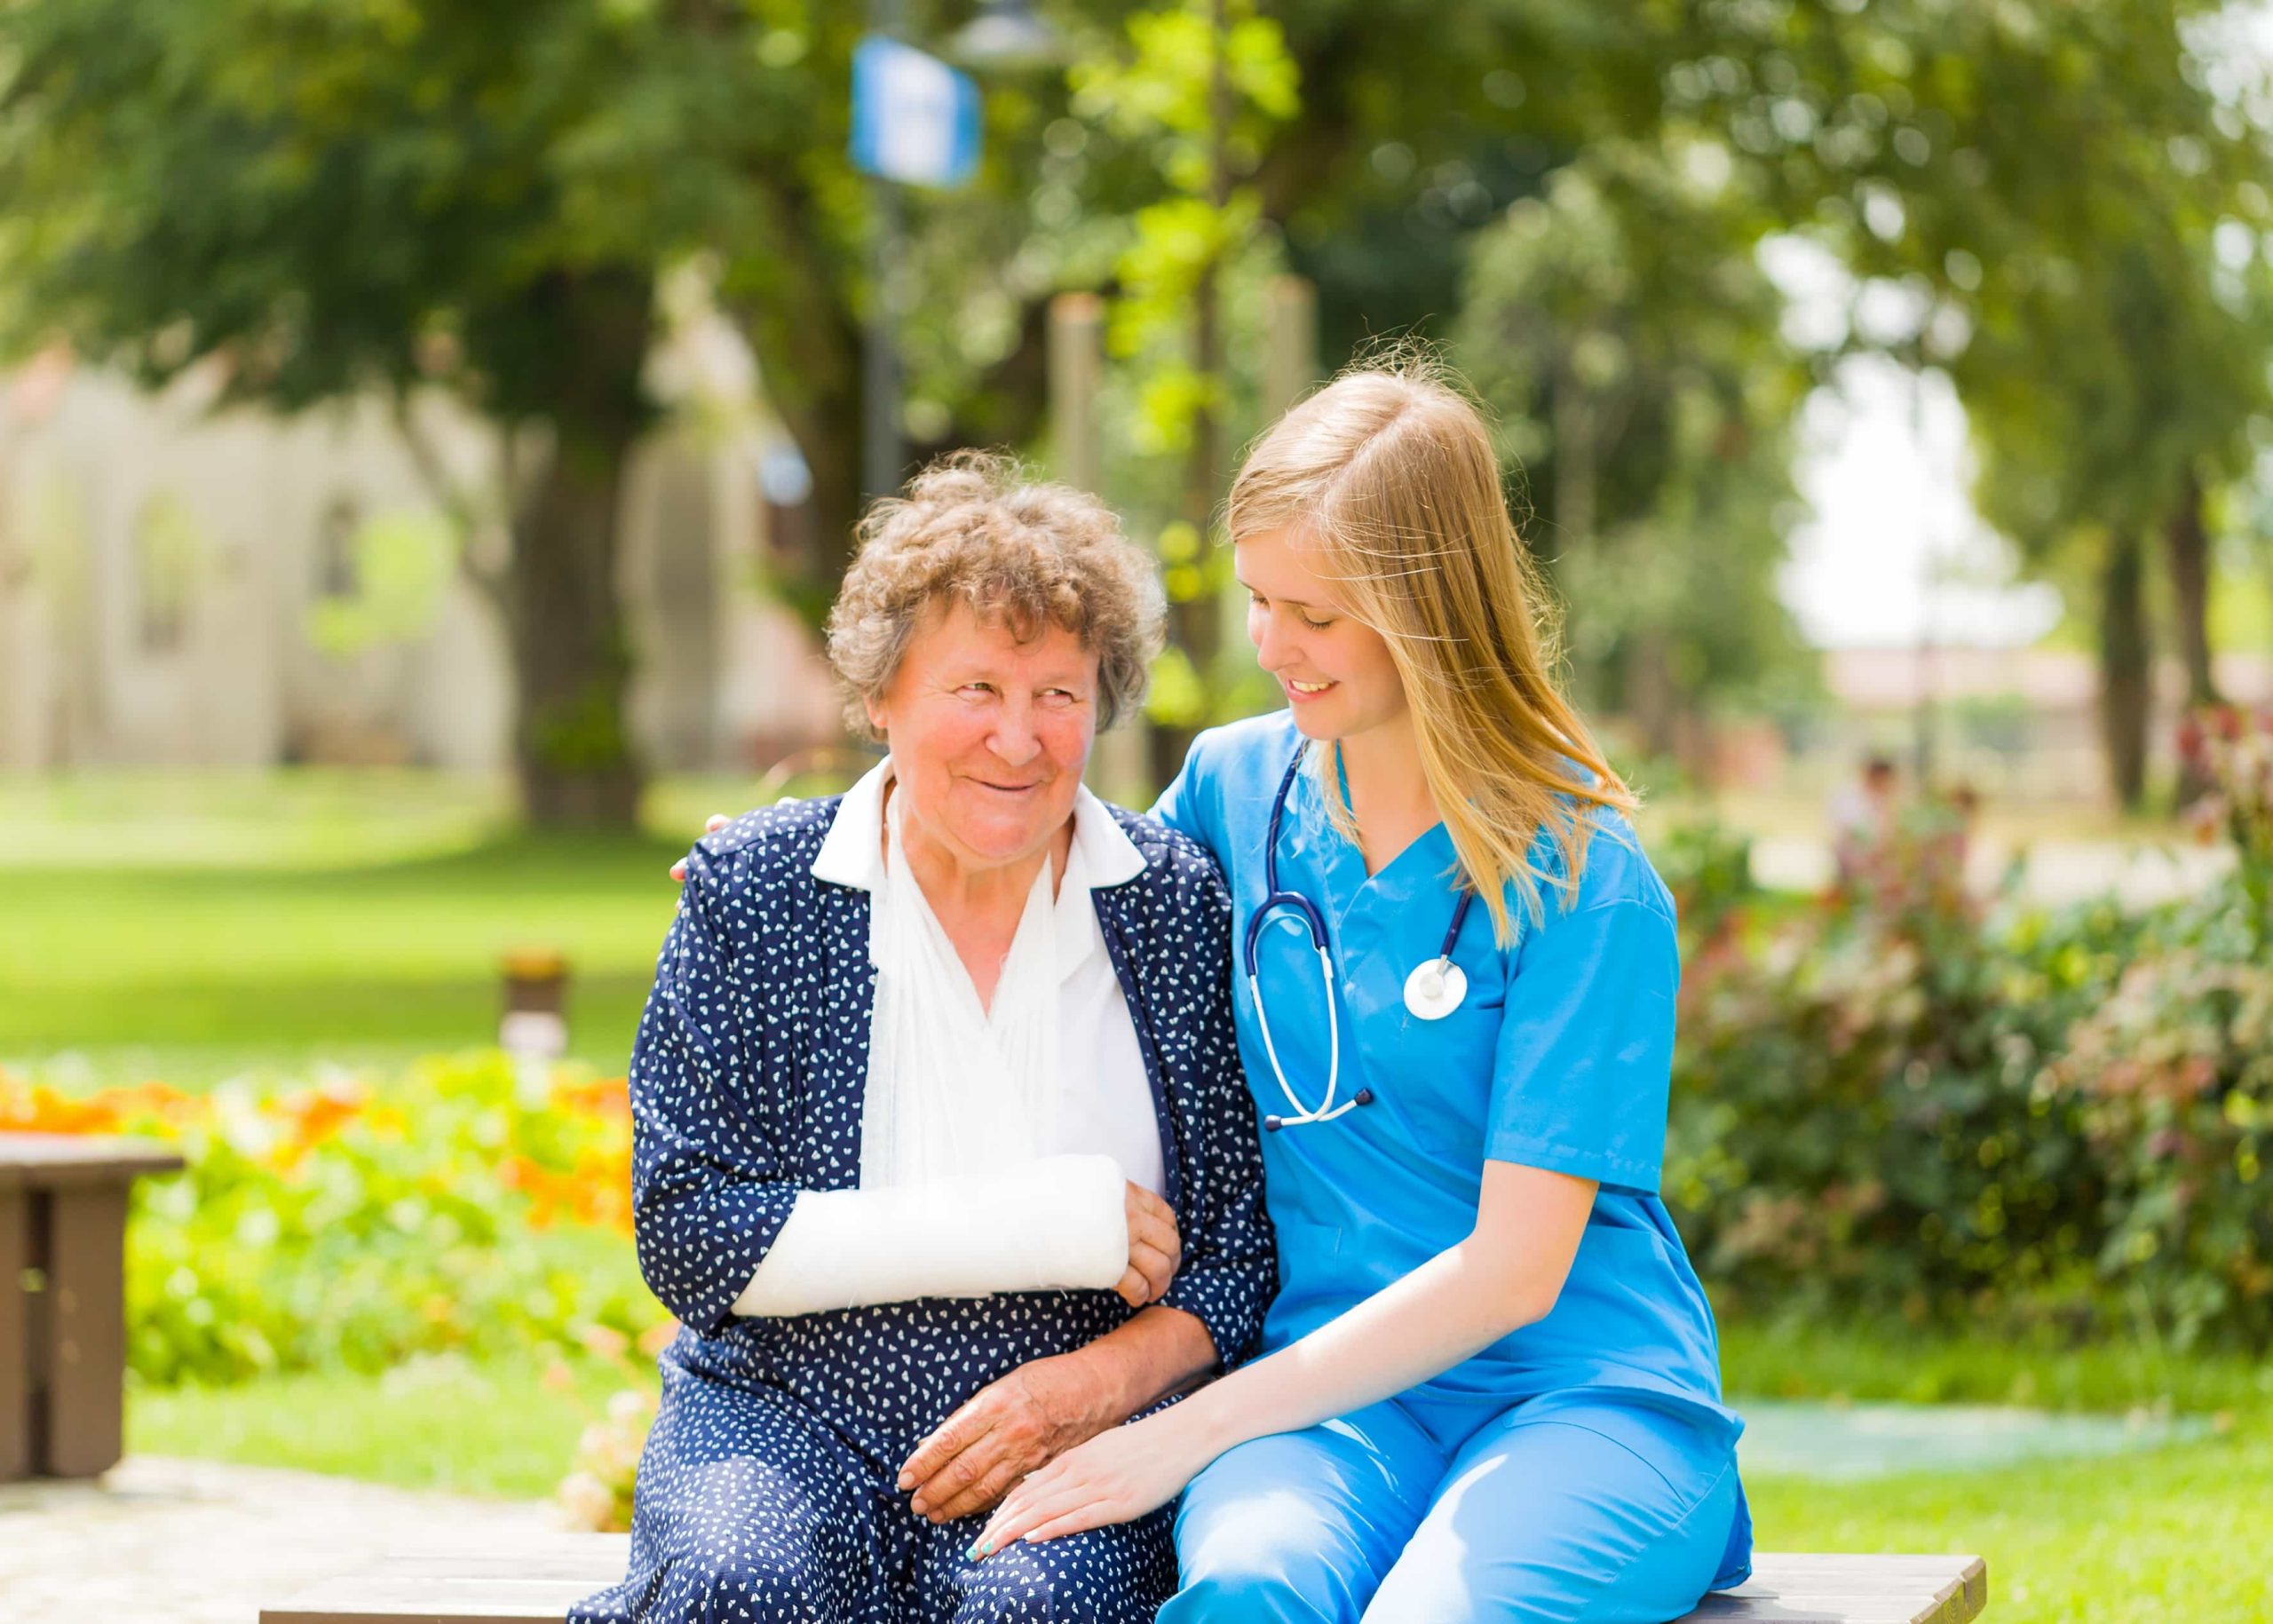 Comforting nurse with elderly woman patient who has plaster on her broken arm staying outdoors.